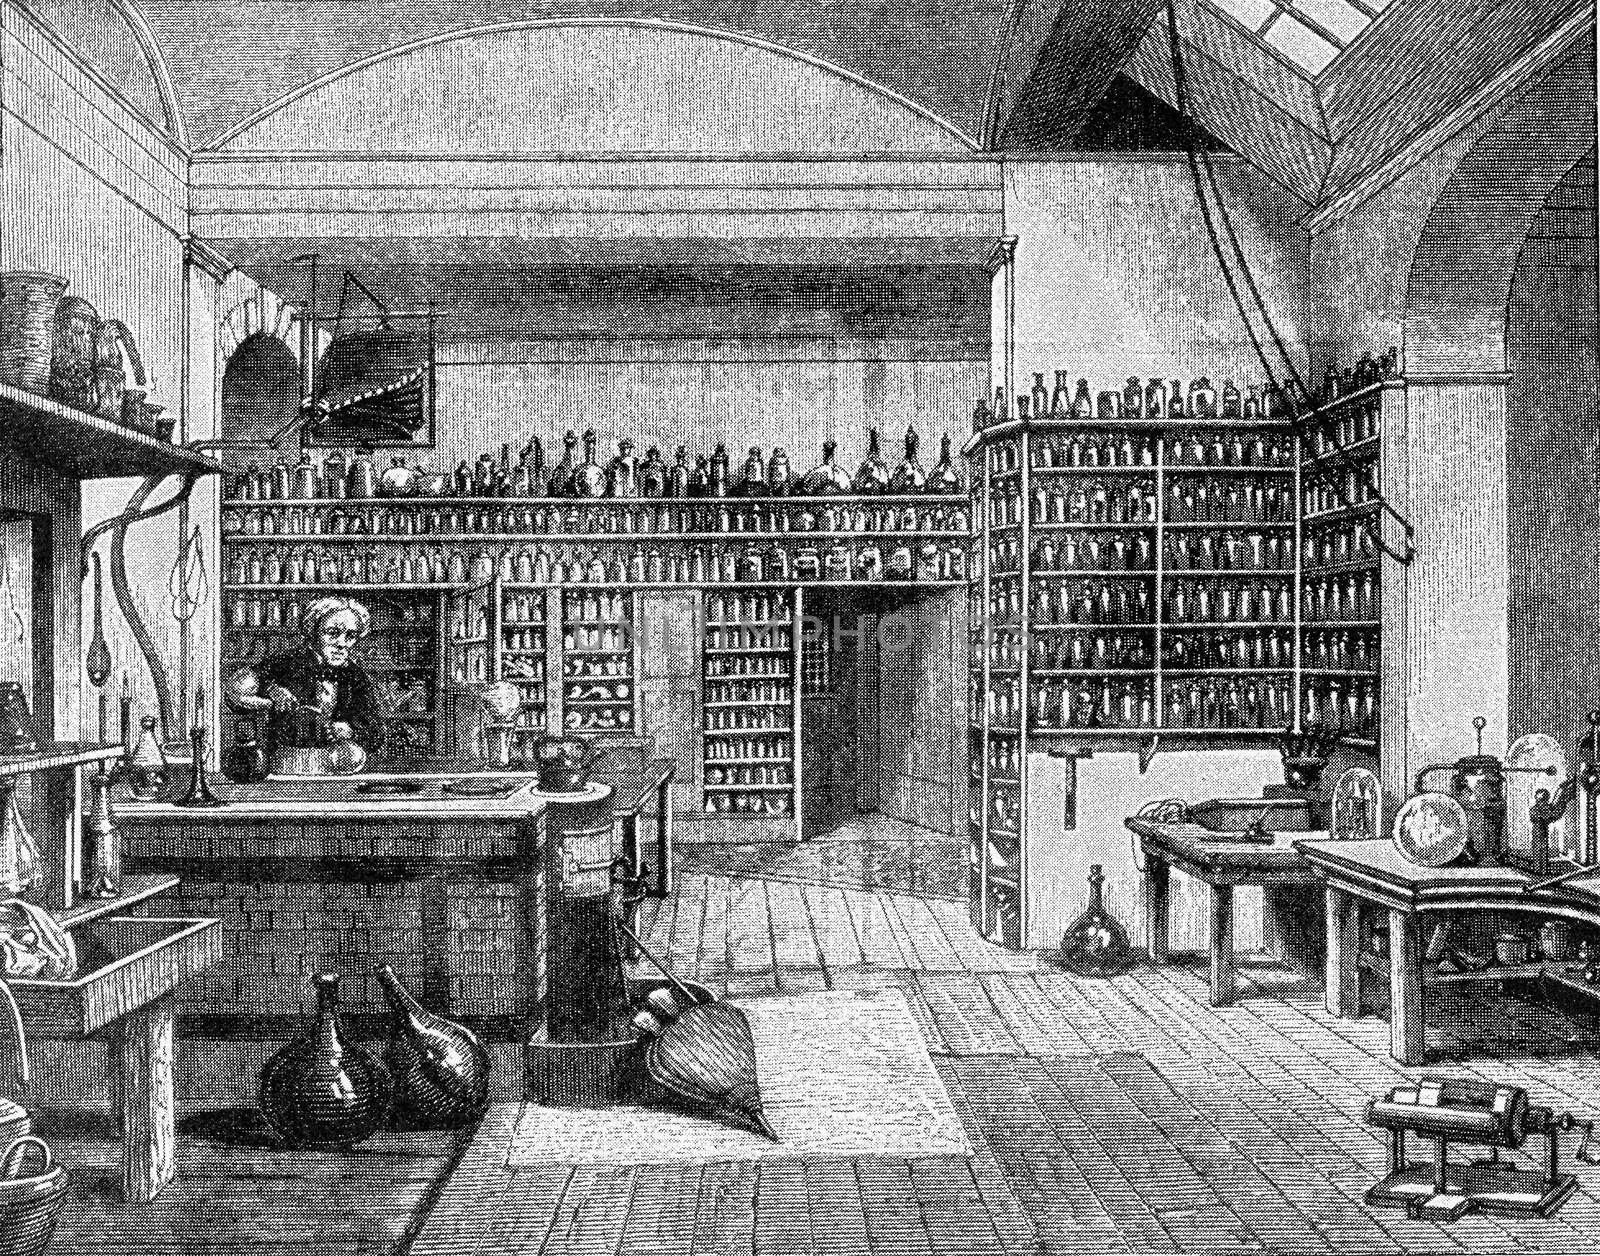 Faraday in his laboratory at the Royal Institution in London, vintage engraved illustration. From the Universe and Humanity, 1910.
